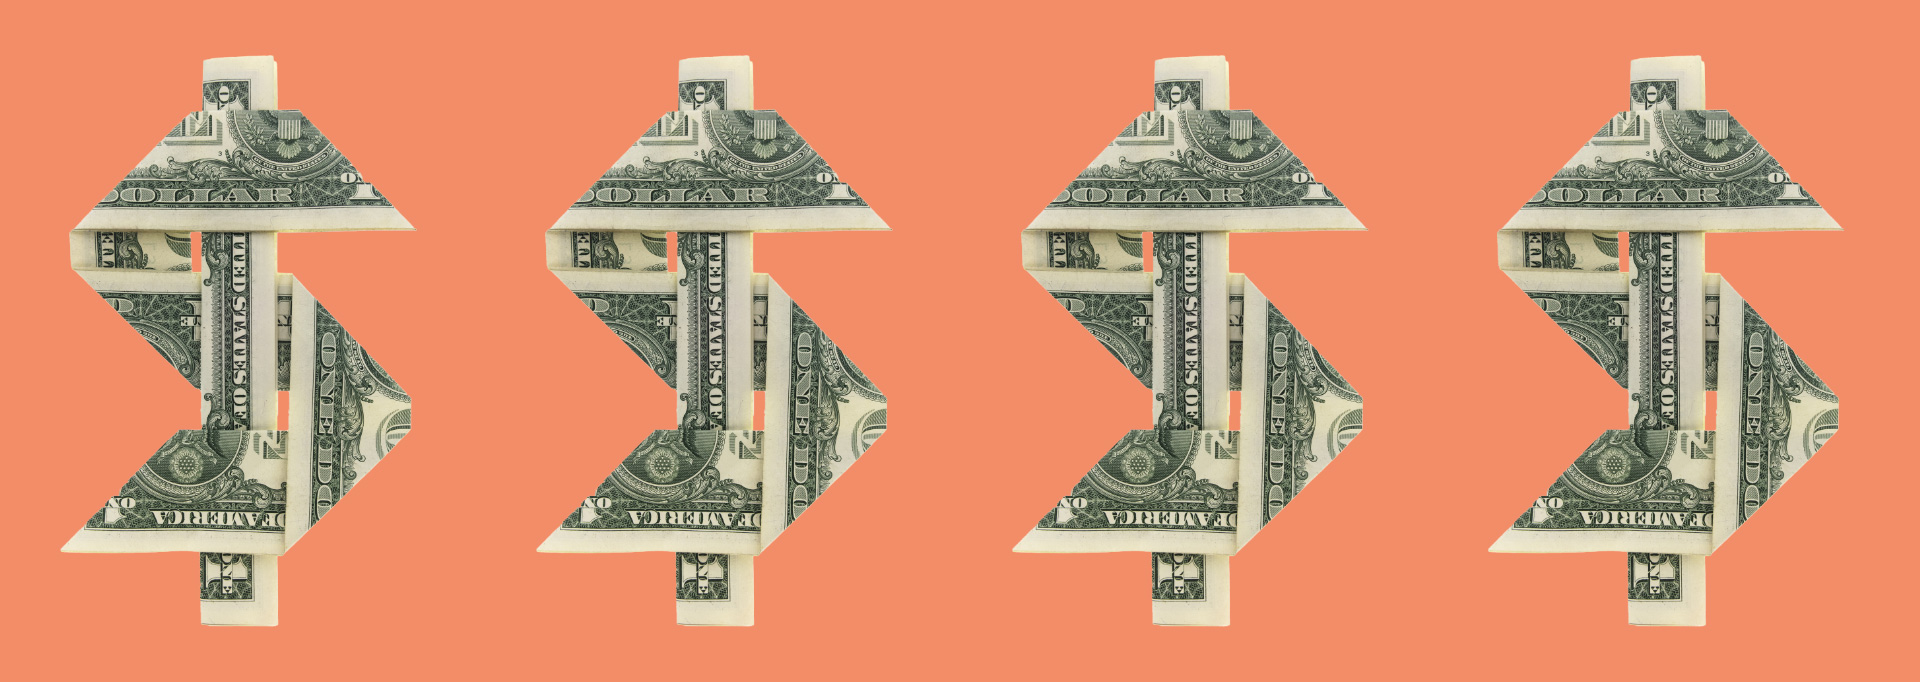 dollar sign made out of money on orange background